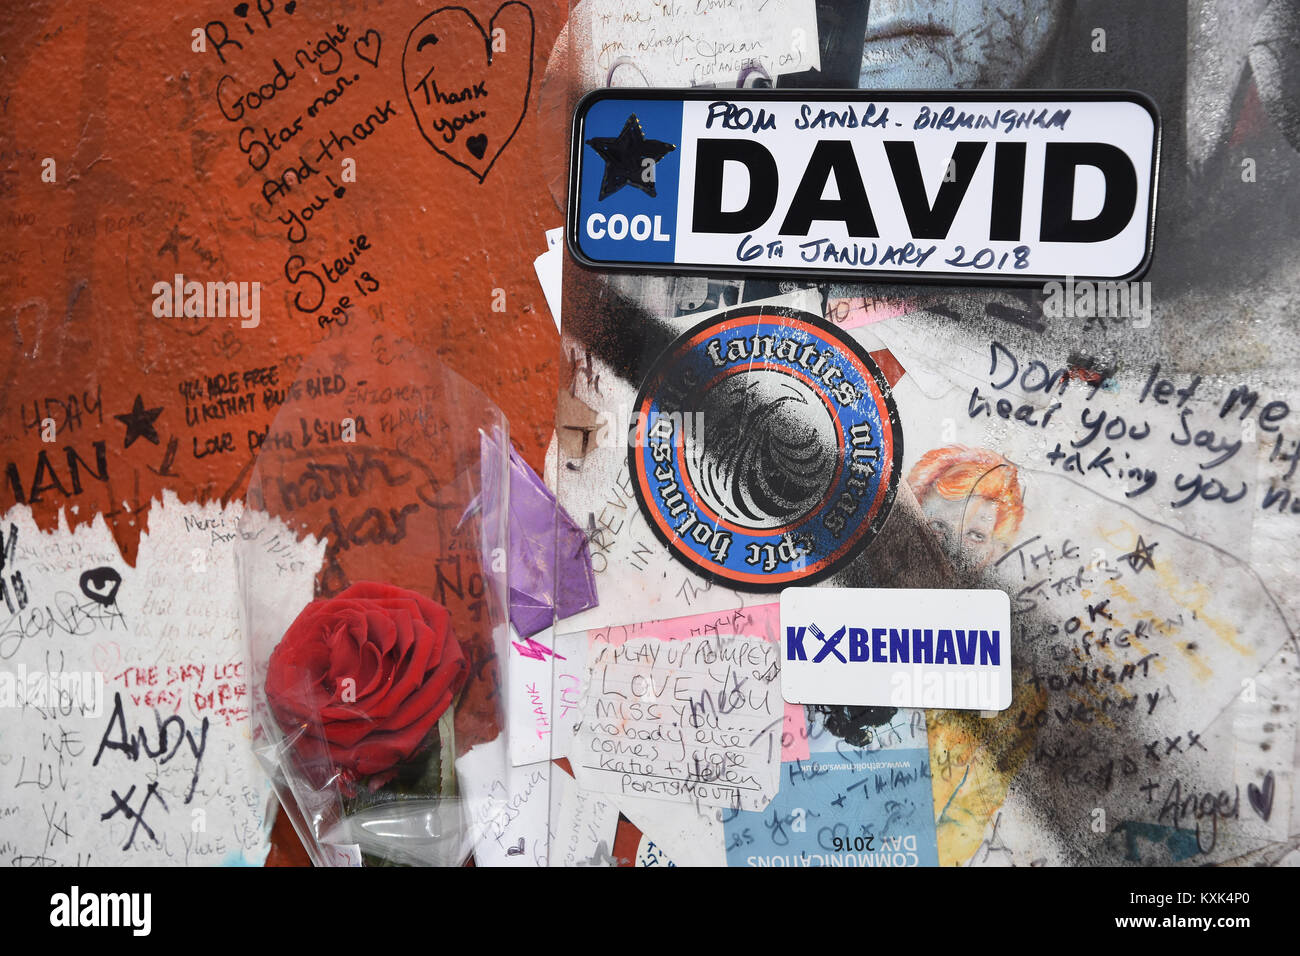 David Bowie fans left messages and floral tributes at the Aladdin Sane Mural in Brixton on the second anniversary of his death on 10.01.16,London.UK Stock Photo